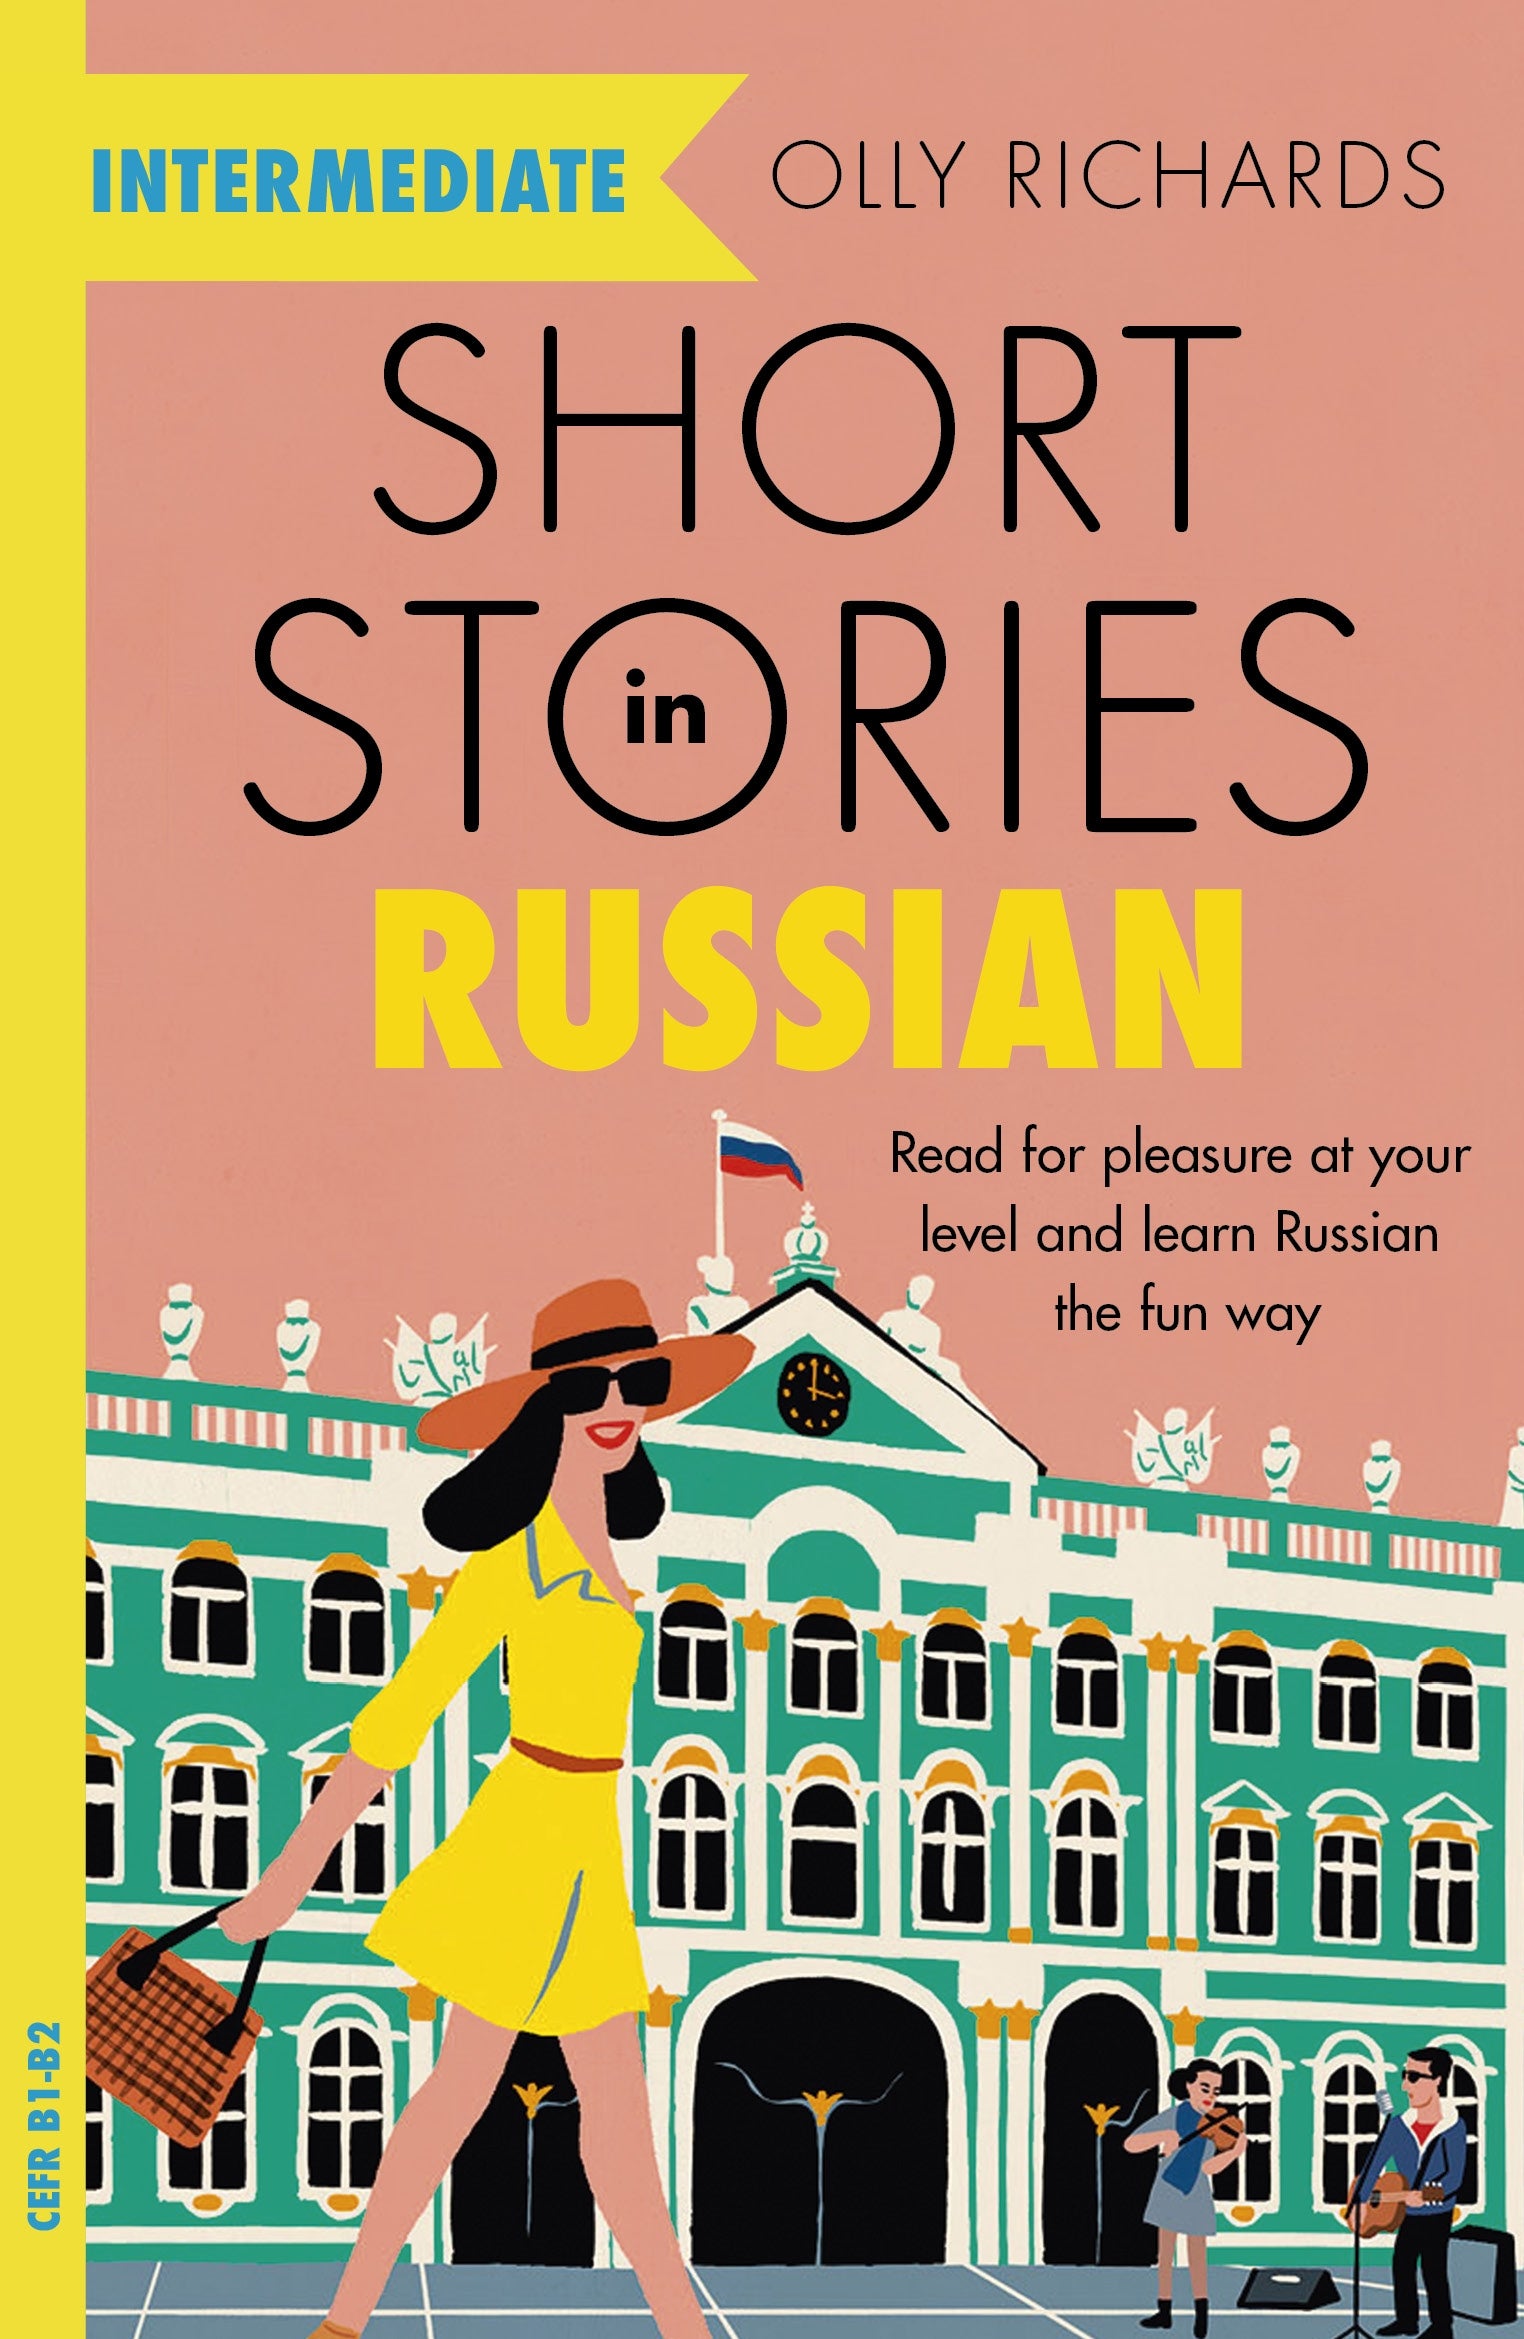 Short Stories in Russian for Intermediate Learners by Olly Richards